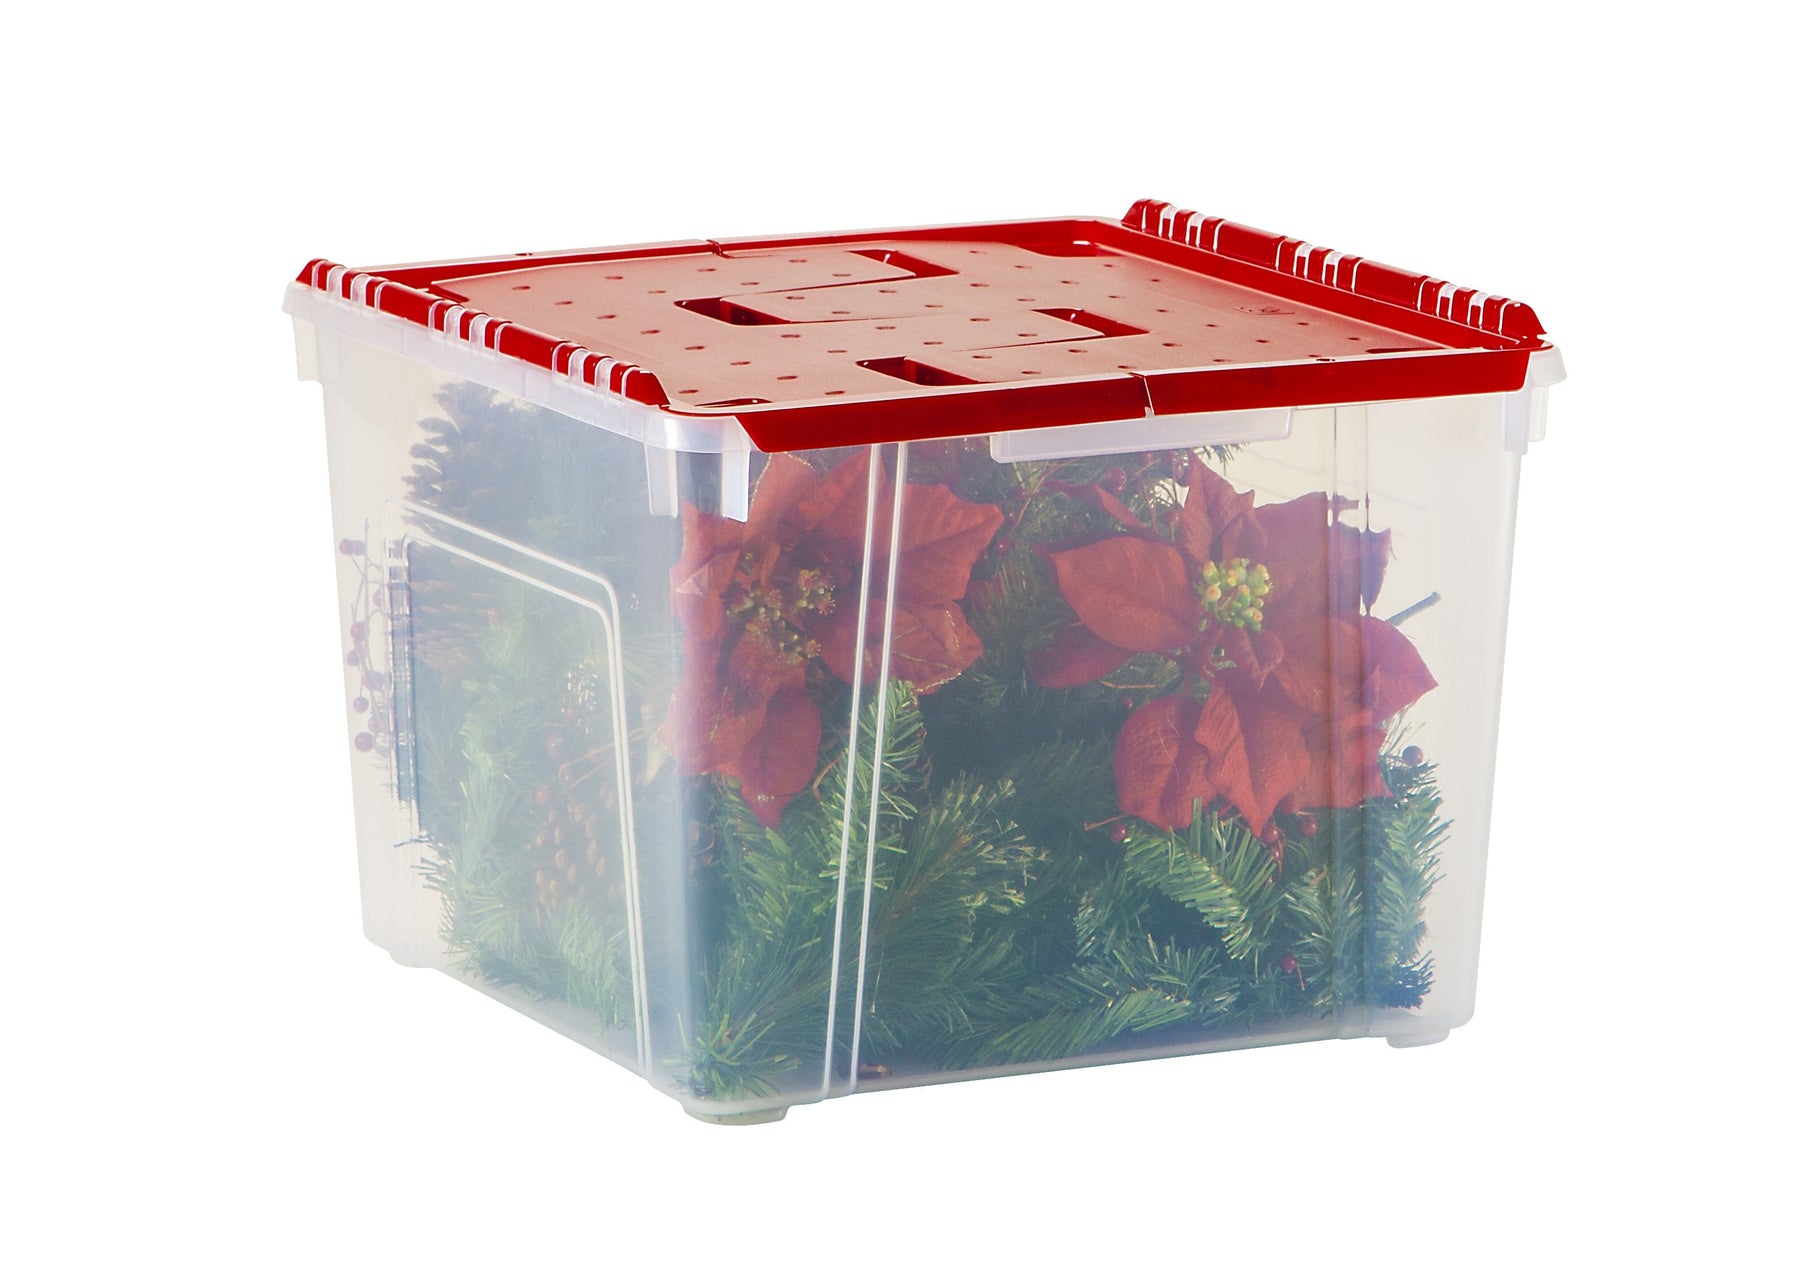 IRIS Holiday Ornament Storage Containers 19 516 x 18 516 x 13 1316